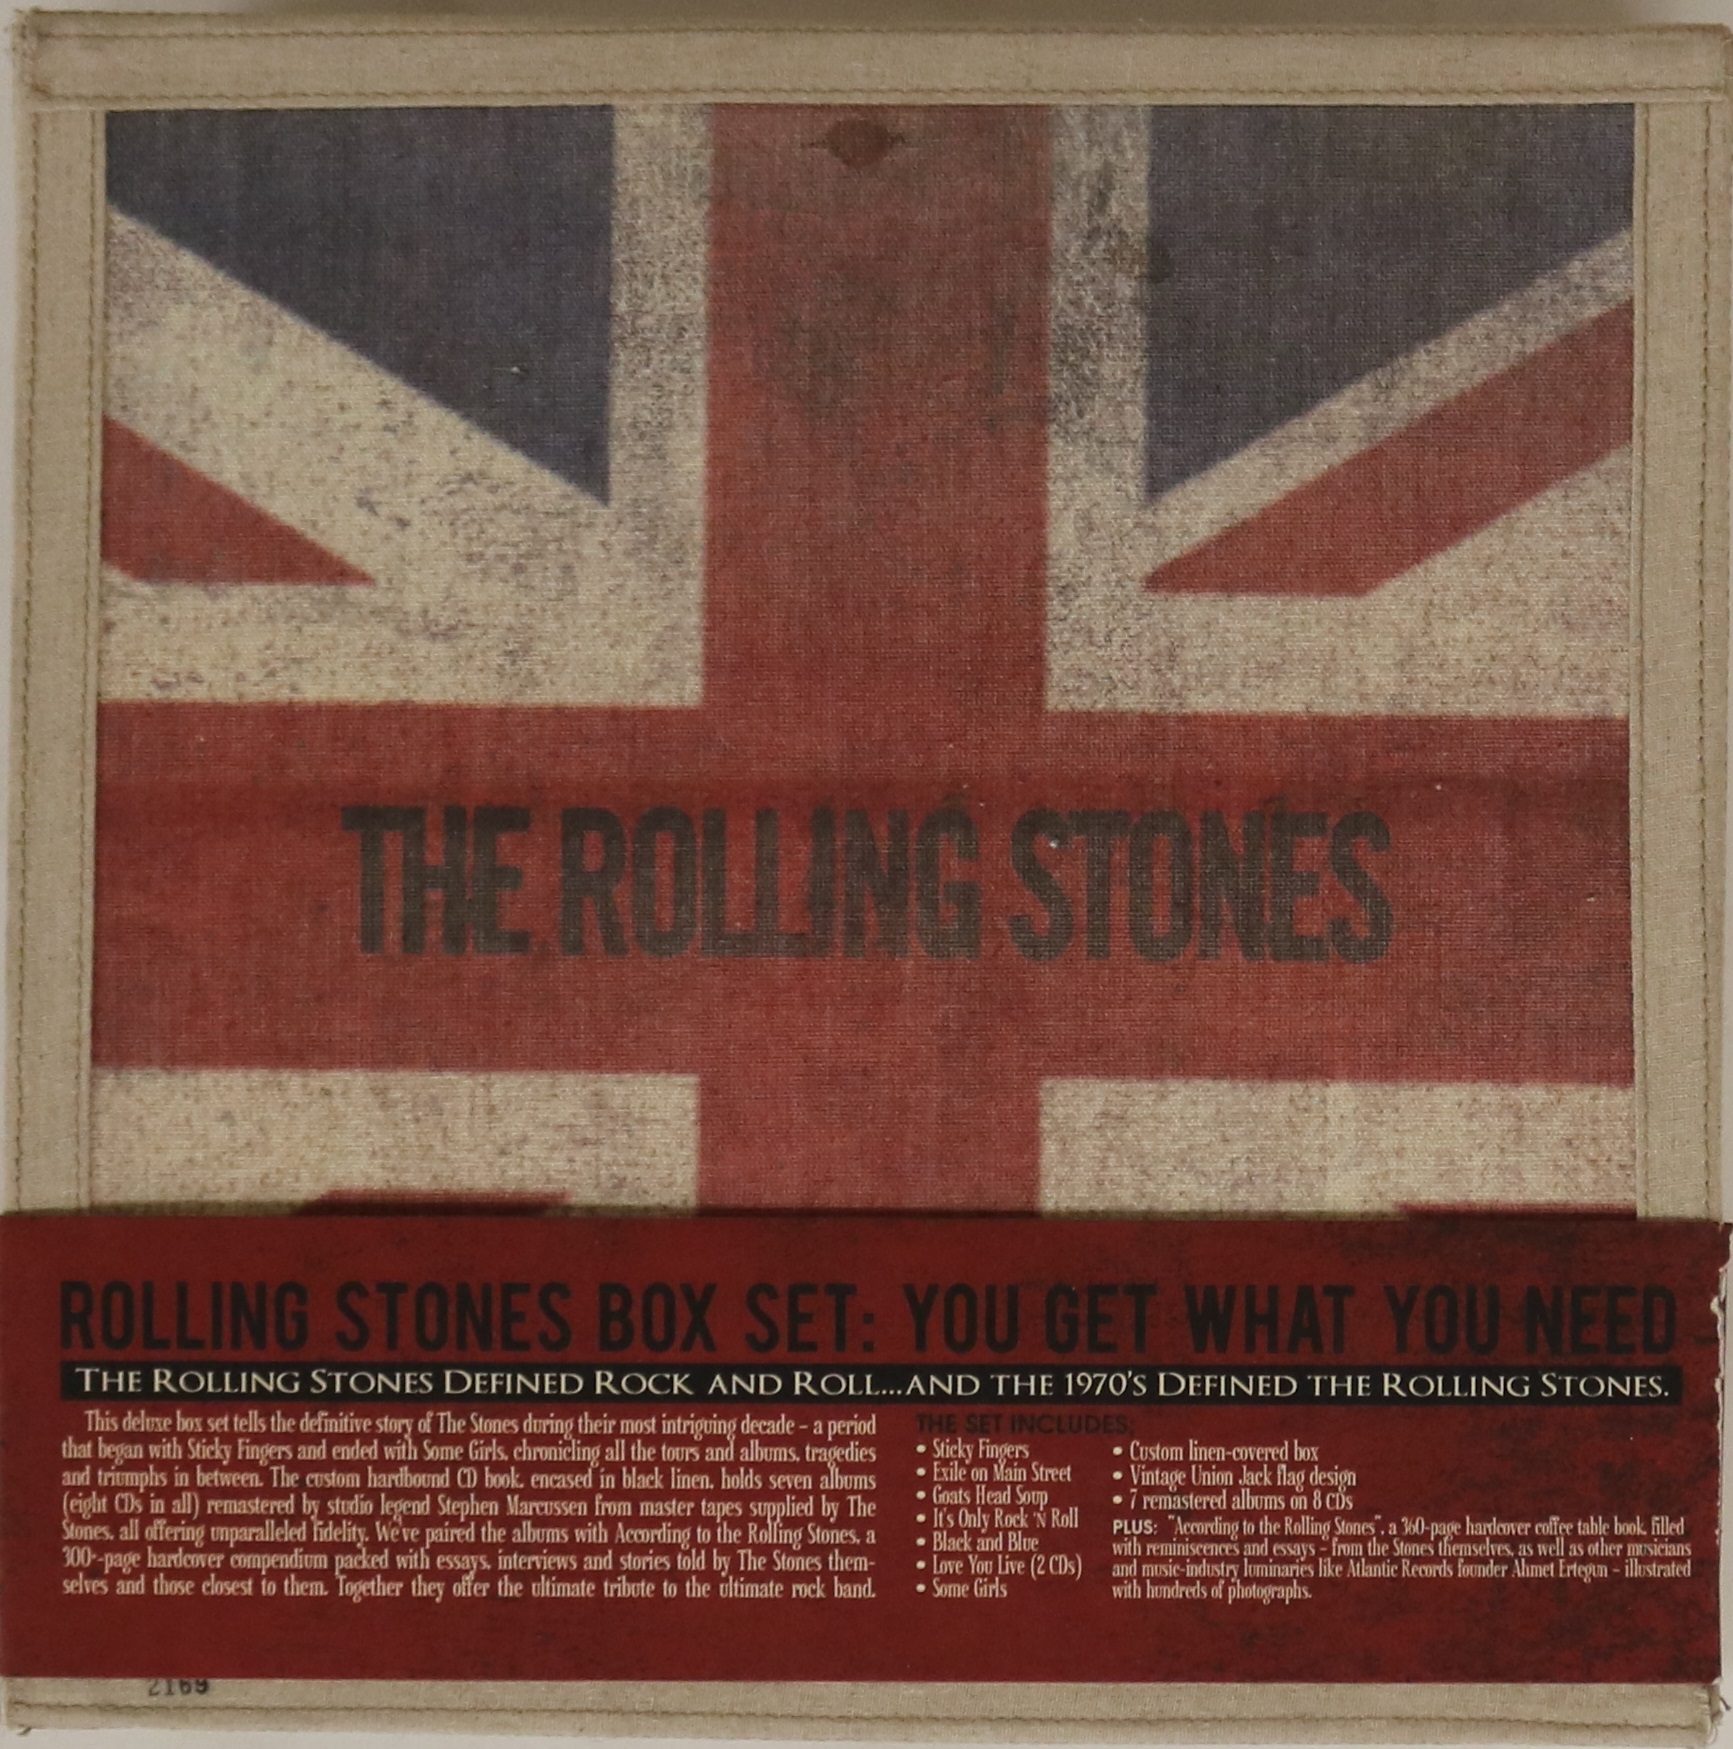 THE ROLLING STONES - YOU GET WHAT YOU NEED (THE SEVENTIES COMPLETE REMASTERED) - CD BOX SET. - Image 2 of 5